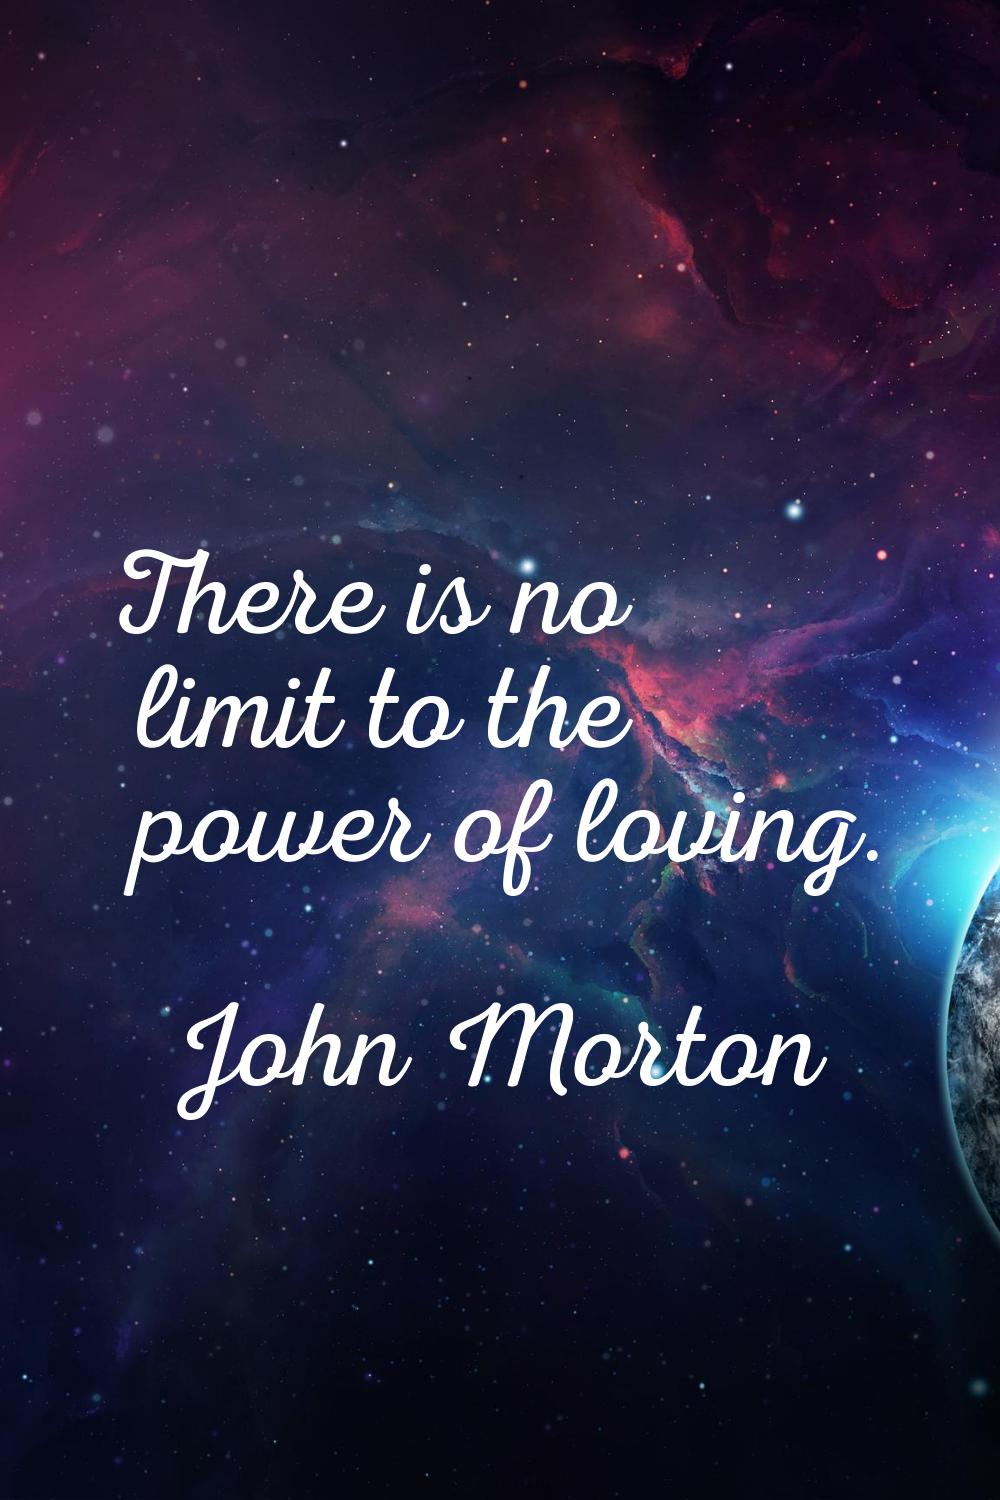 There is no limit to the power of loving.